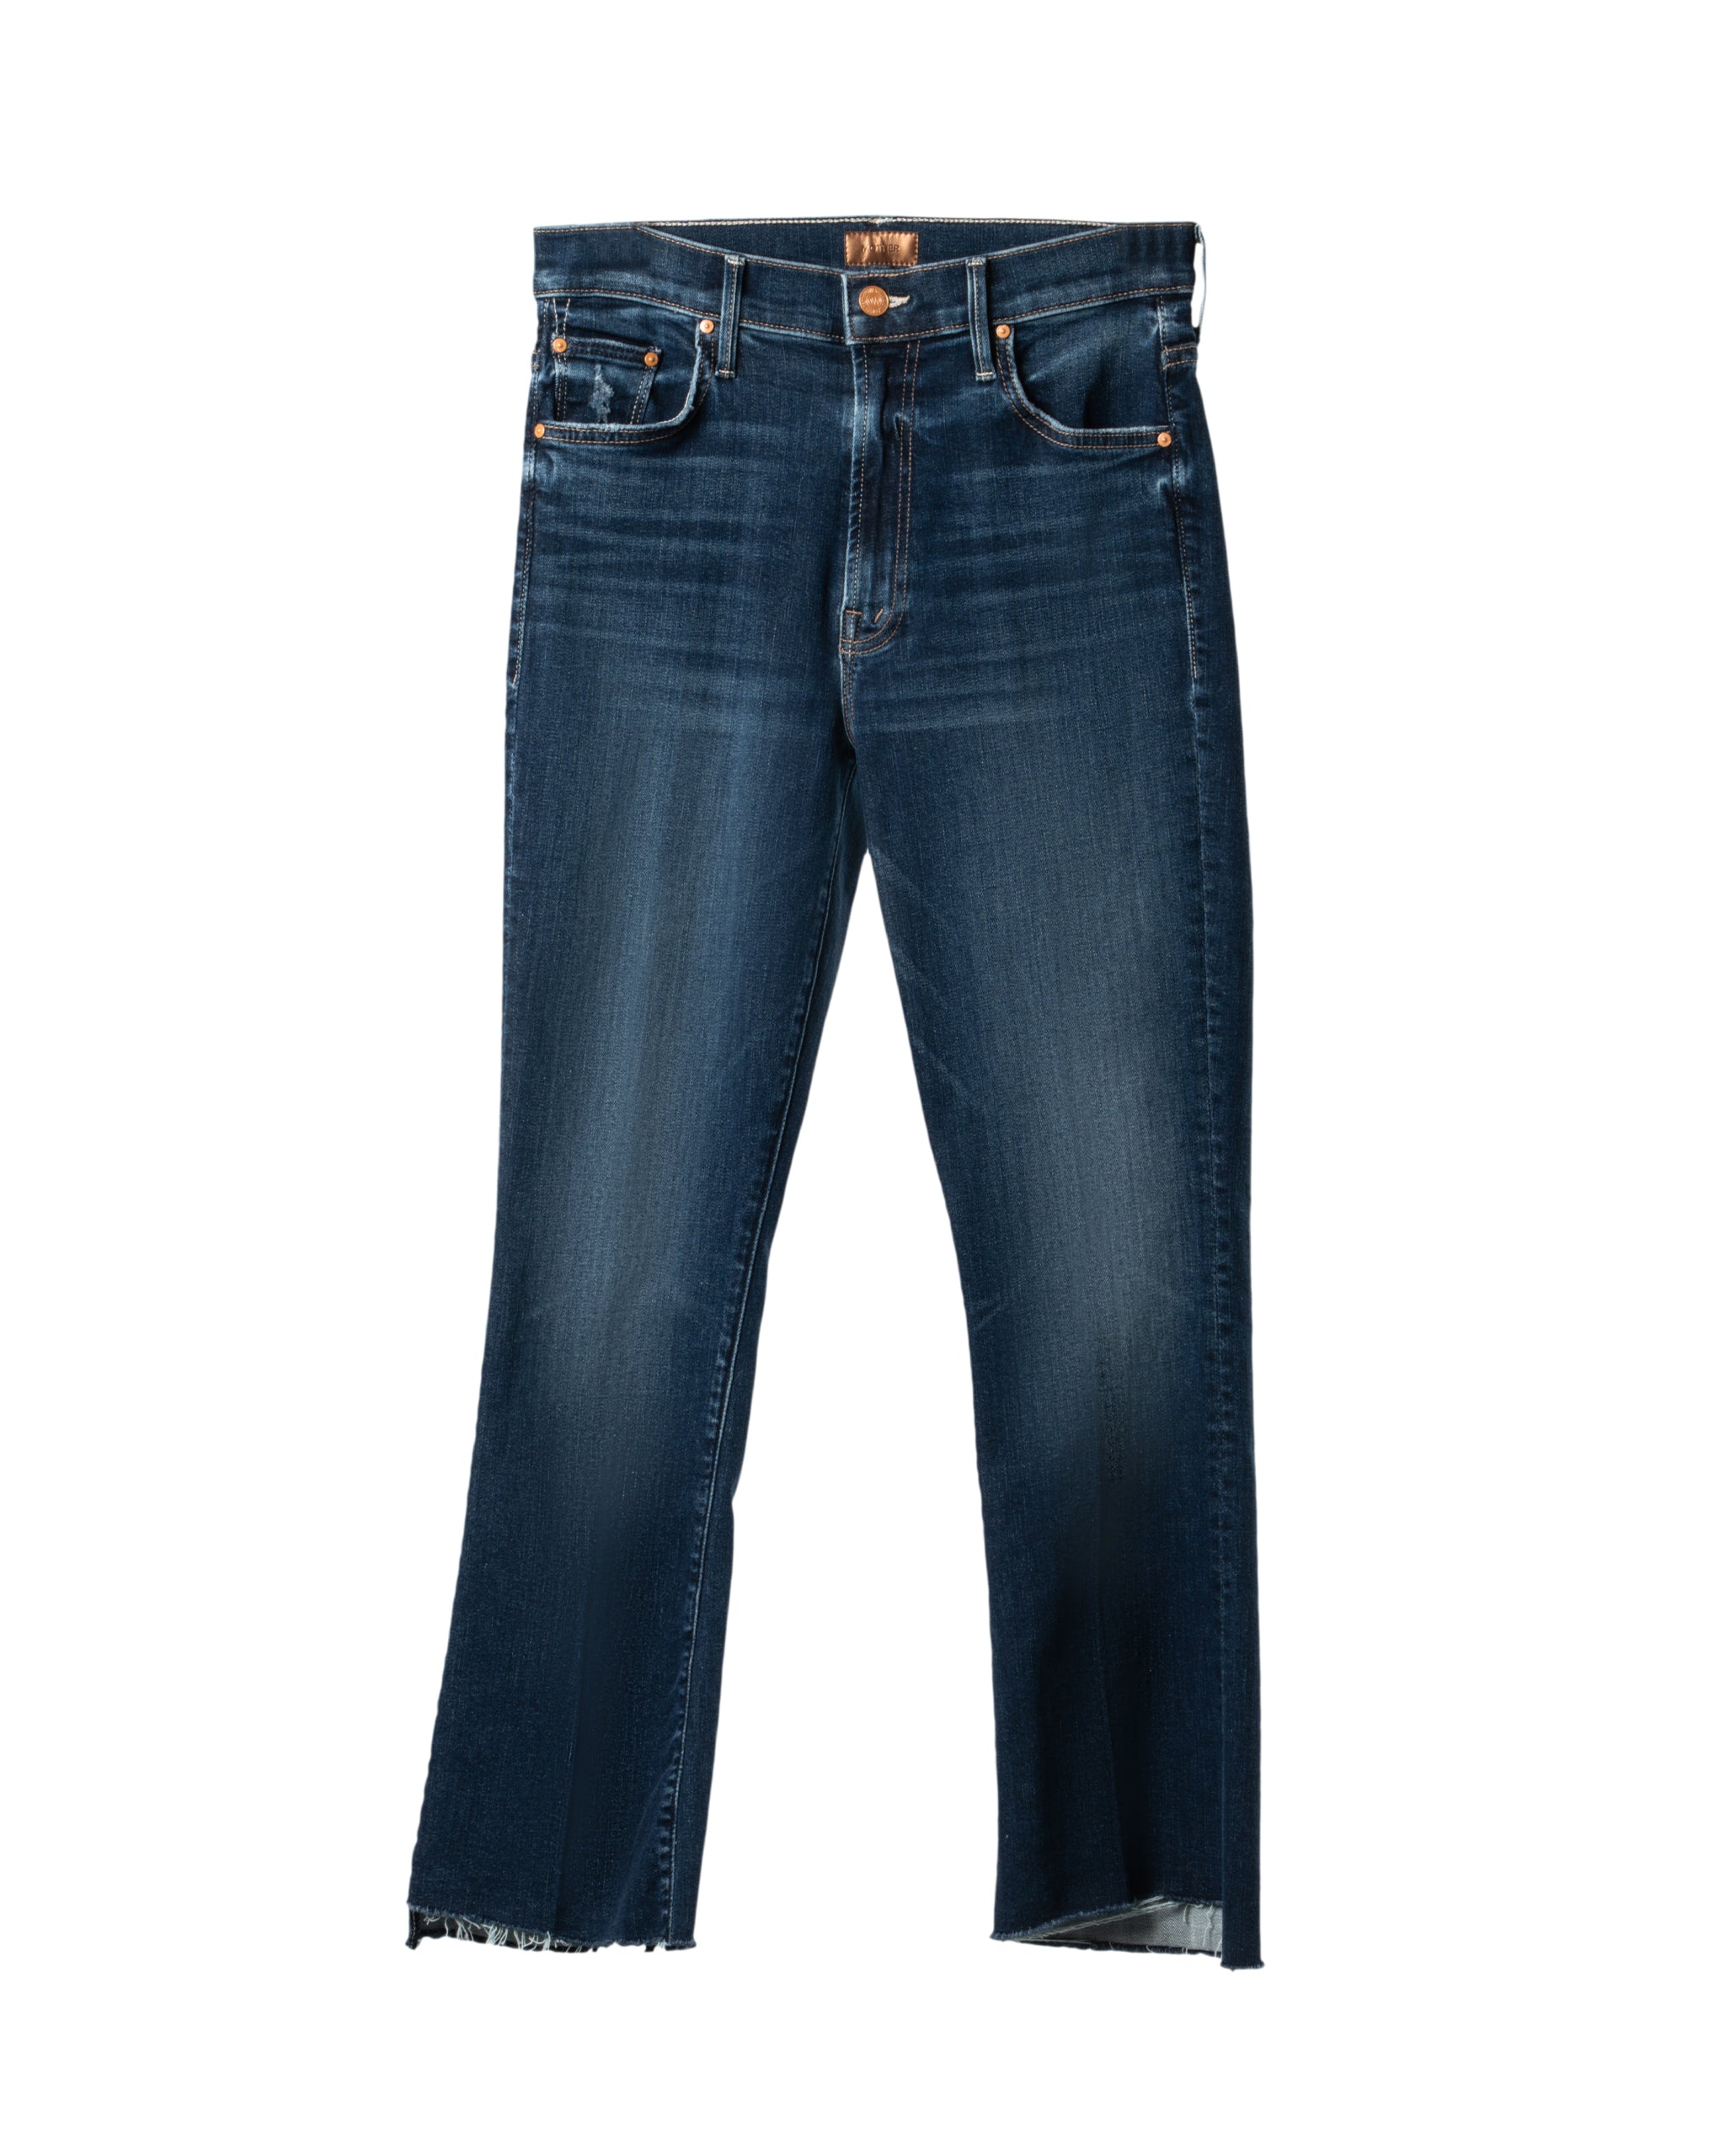 INSIDER CROPPED STEP FREY JEANS